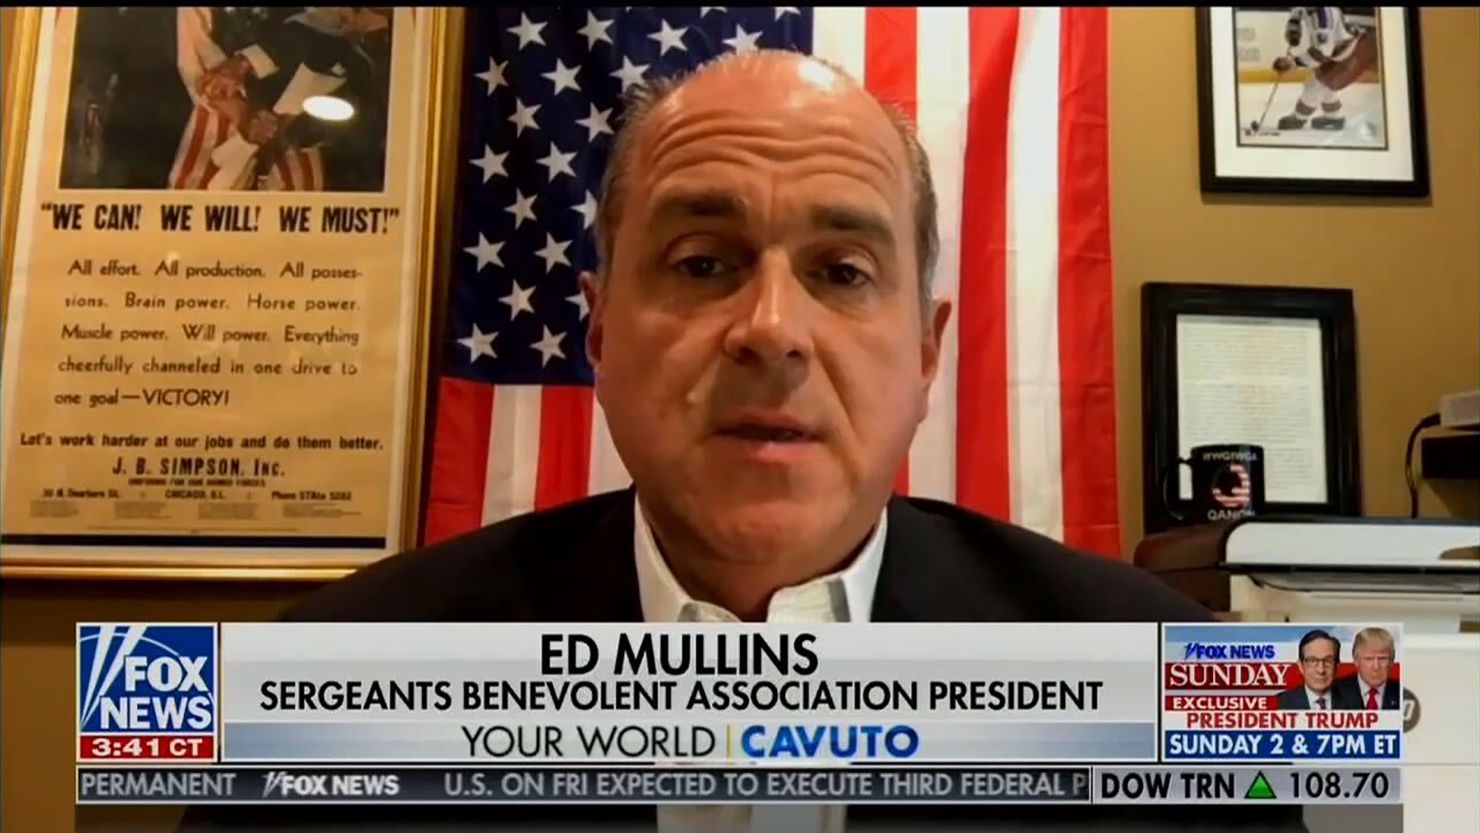 Ed Mullins during an appearance on Fox News Friday. A coffee mug with the logo of QAnon sits above his left shoulder in the bottom right of the photo.